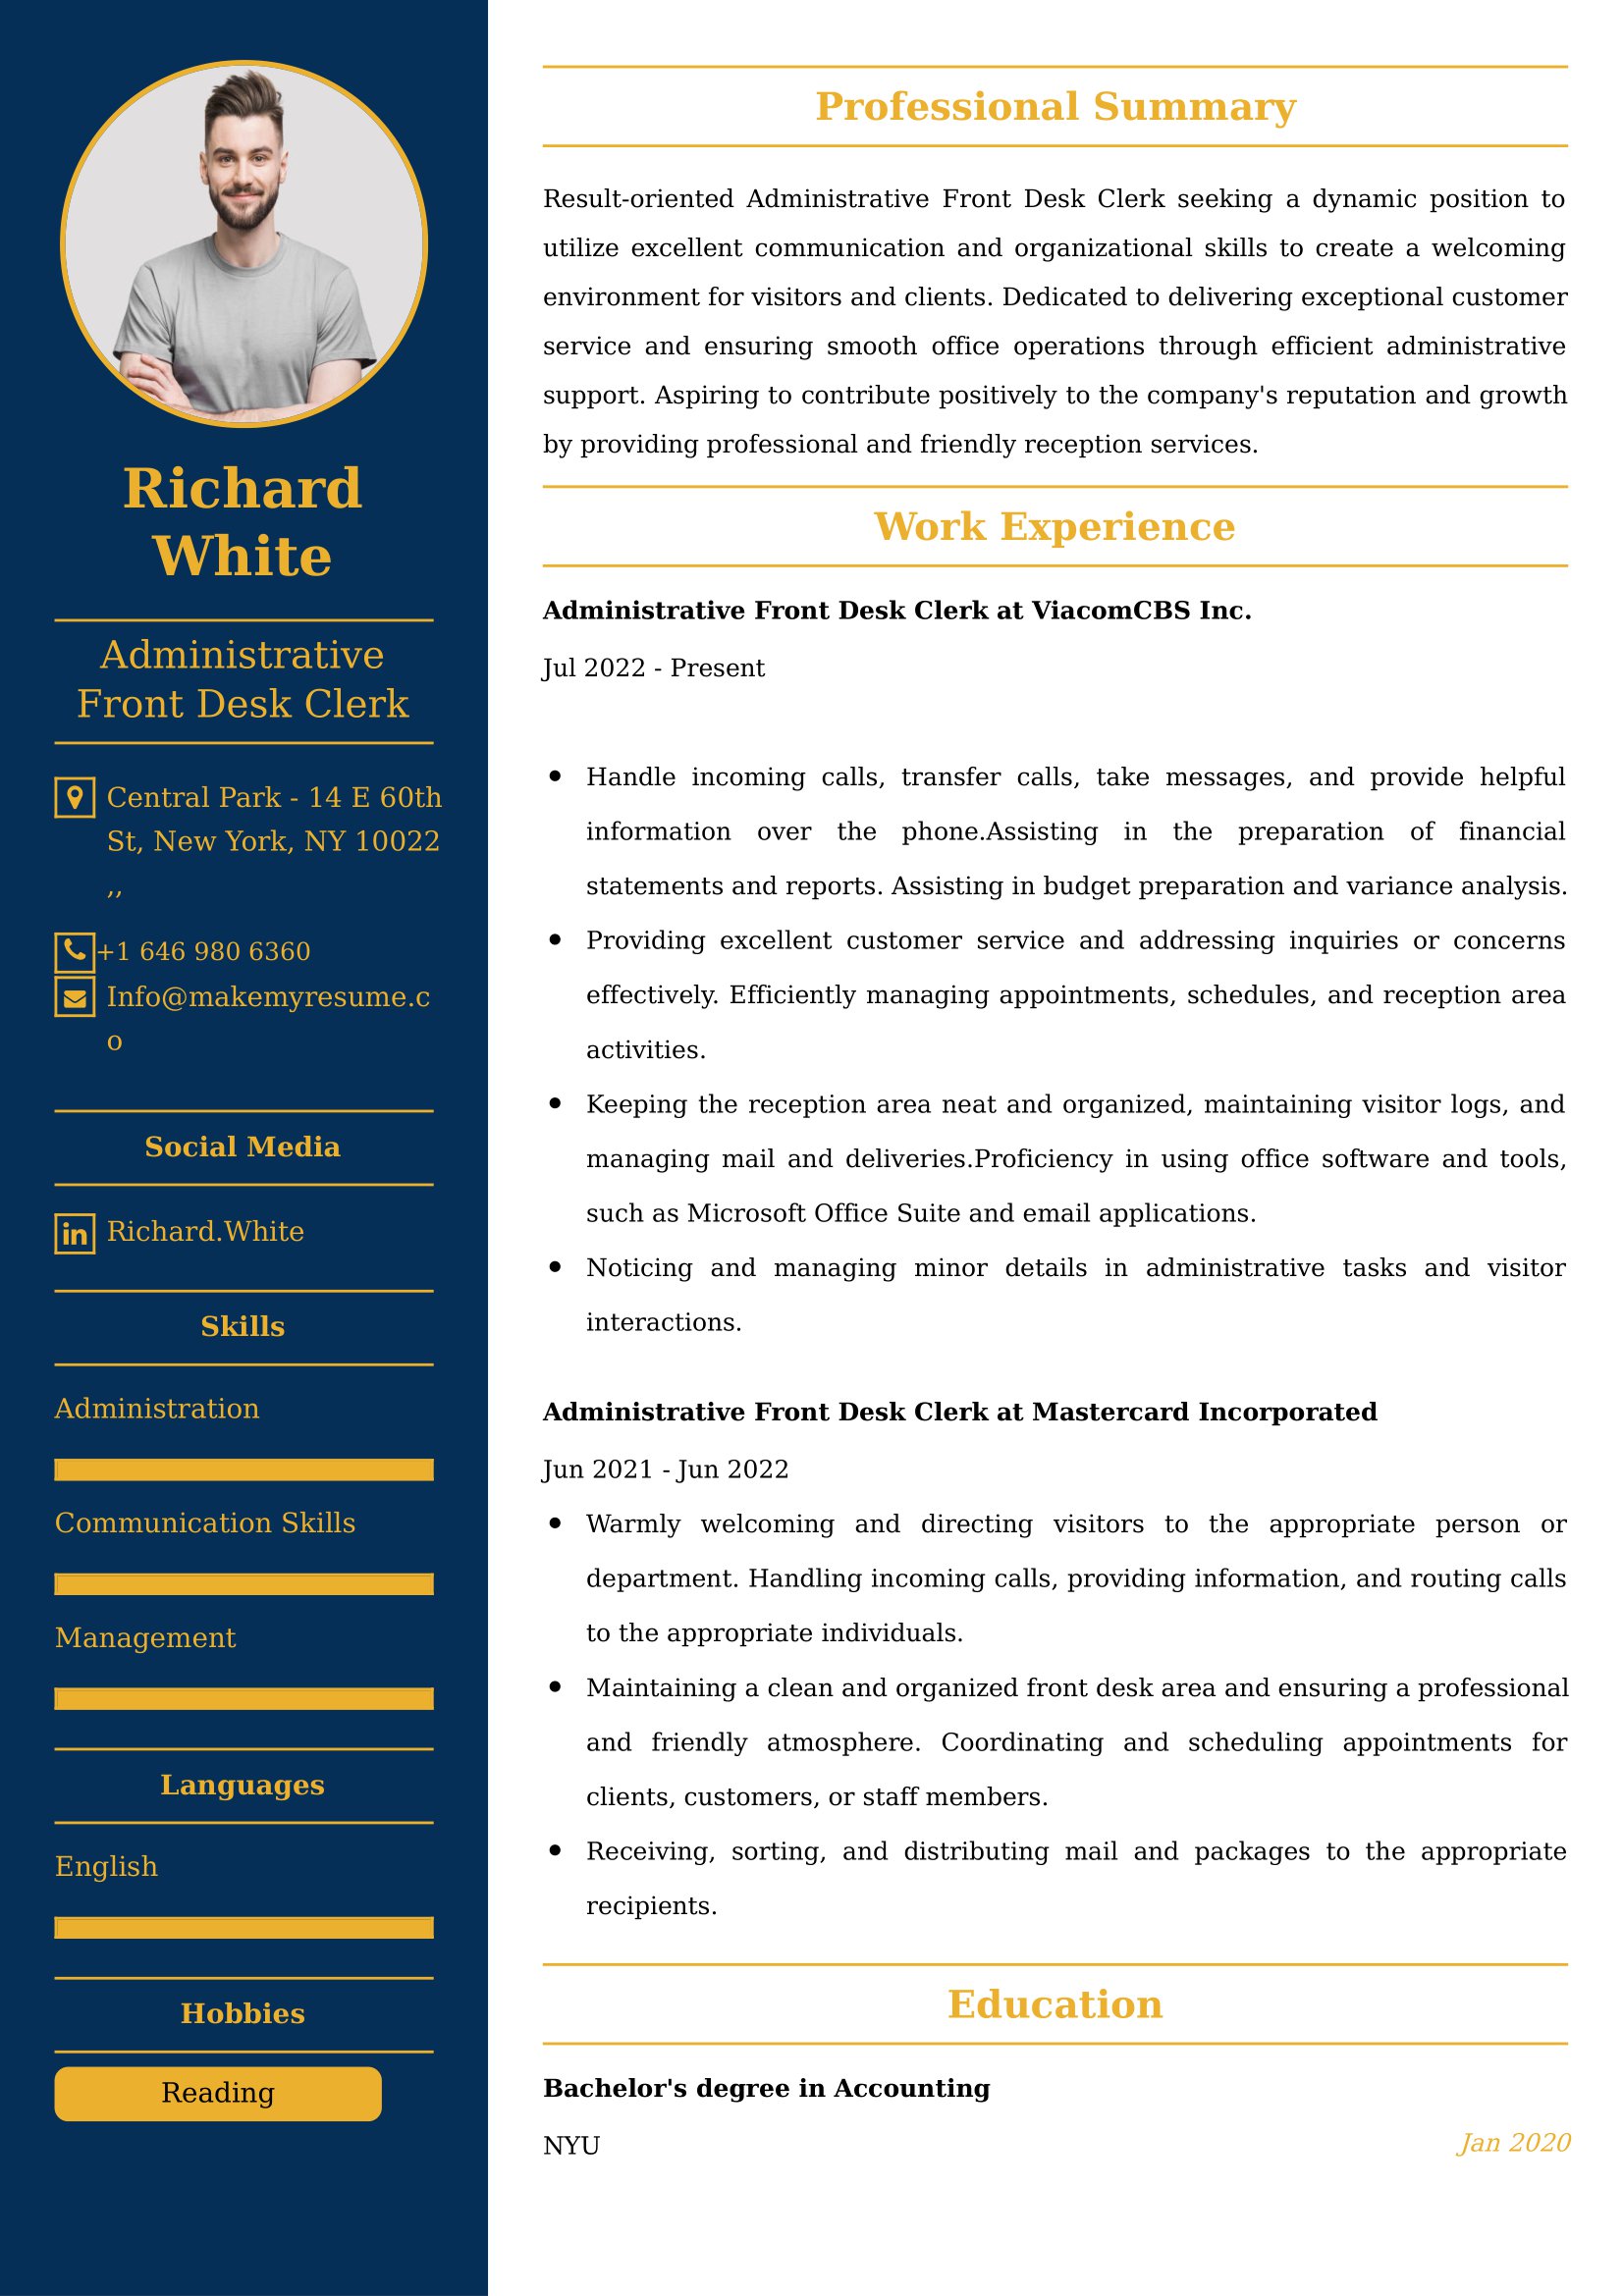 Administrative Front Desk Clerk Resume Examples for UK Jobs - Tips and Guide